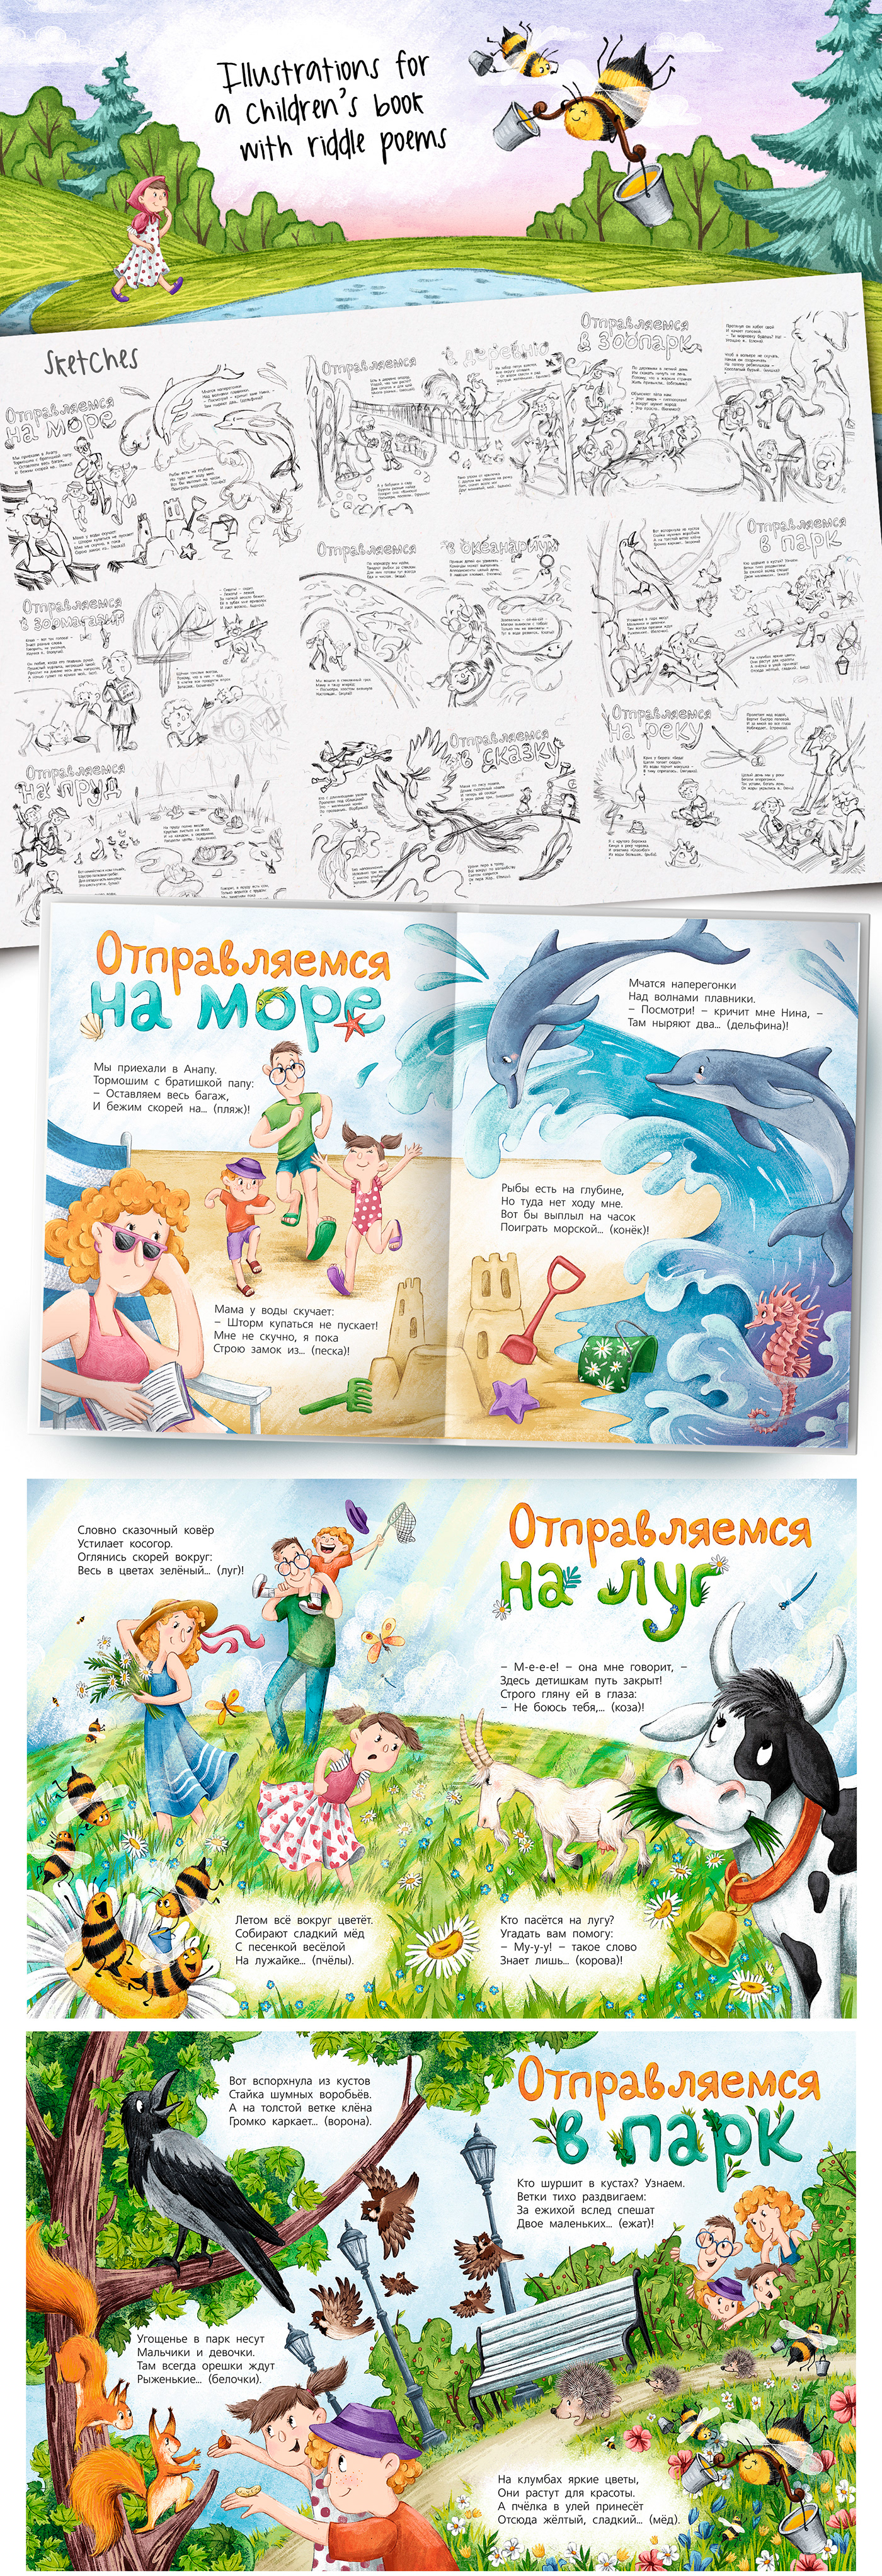 Illustrations for a children's book with riddle poems